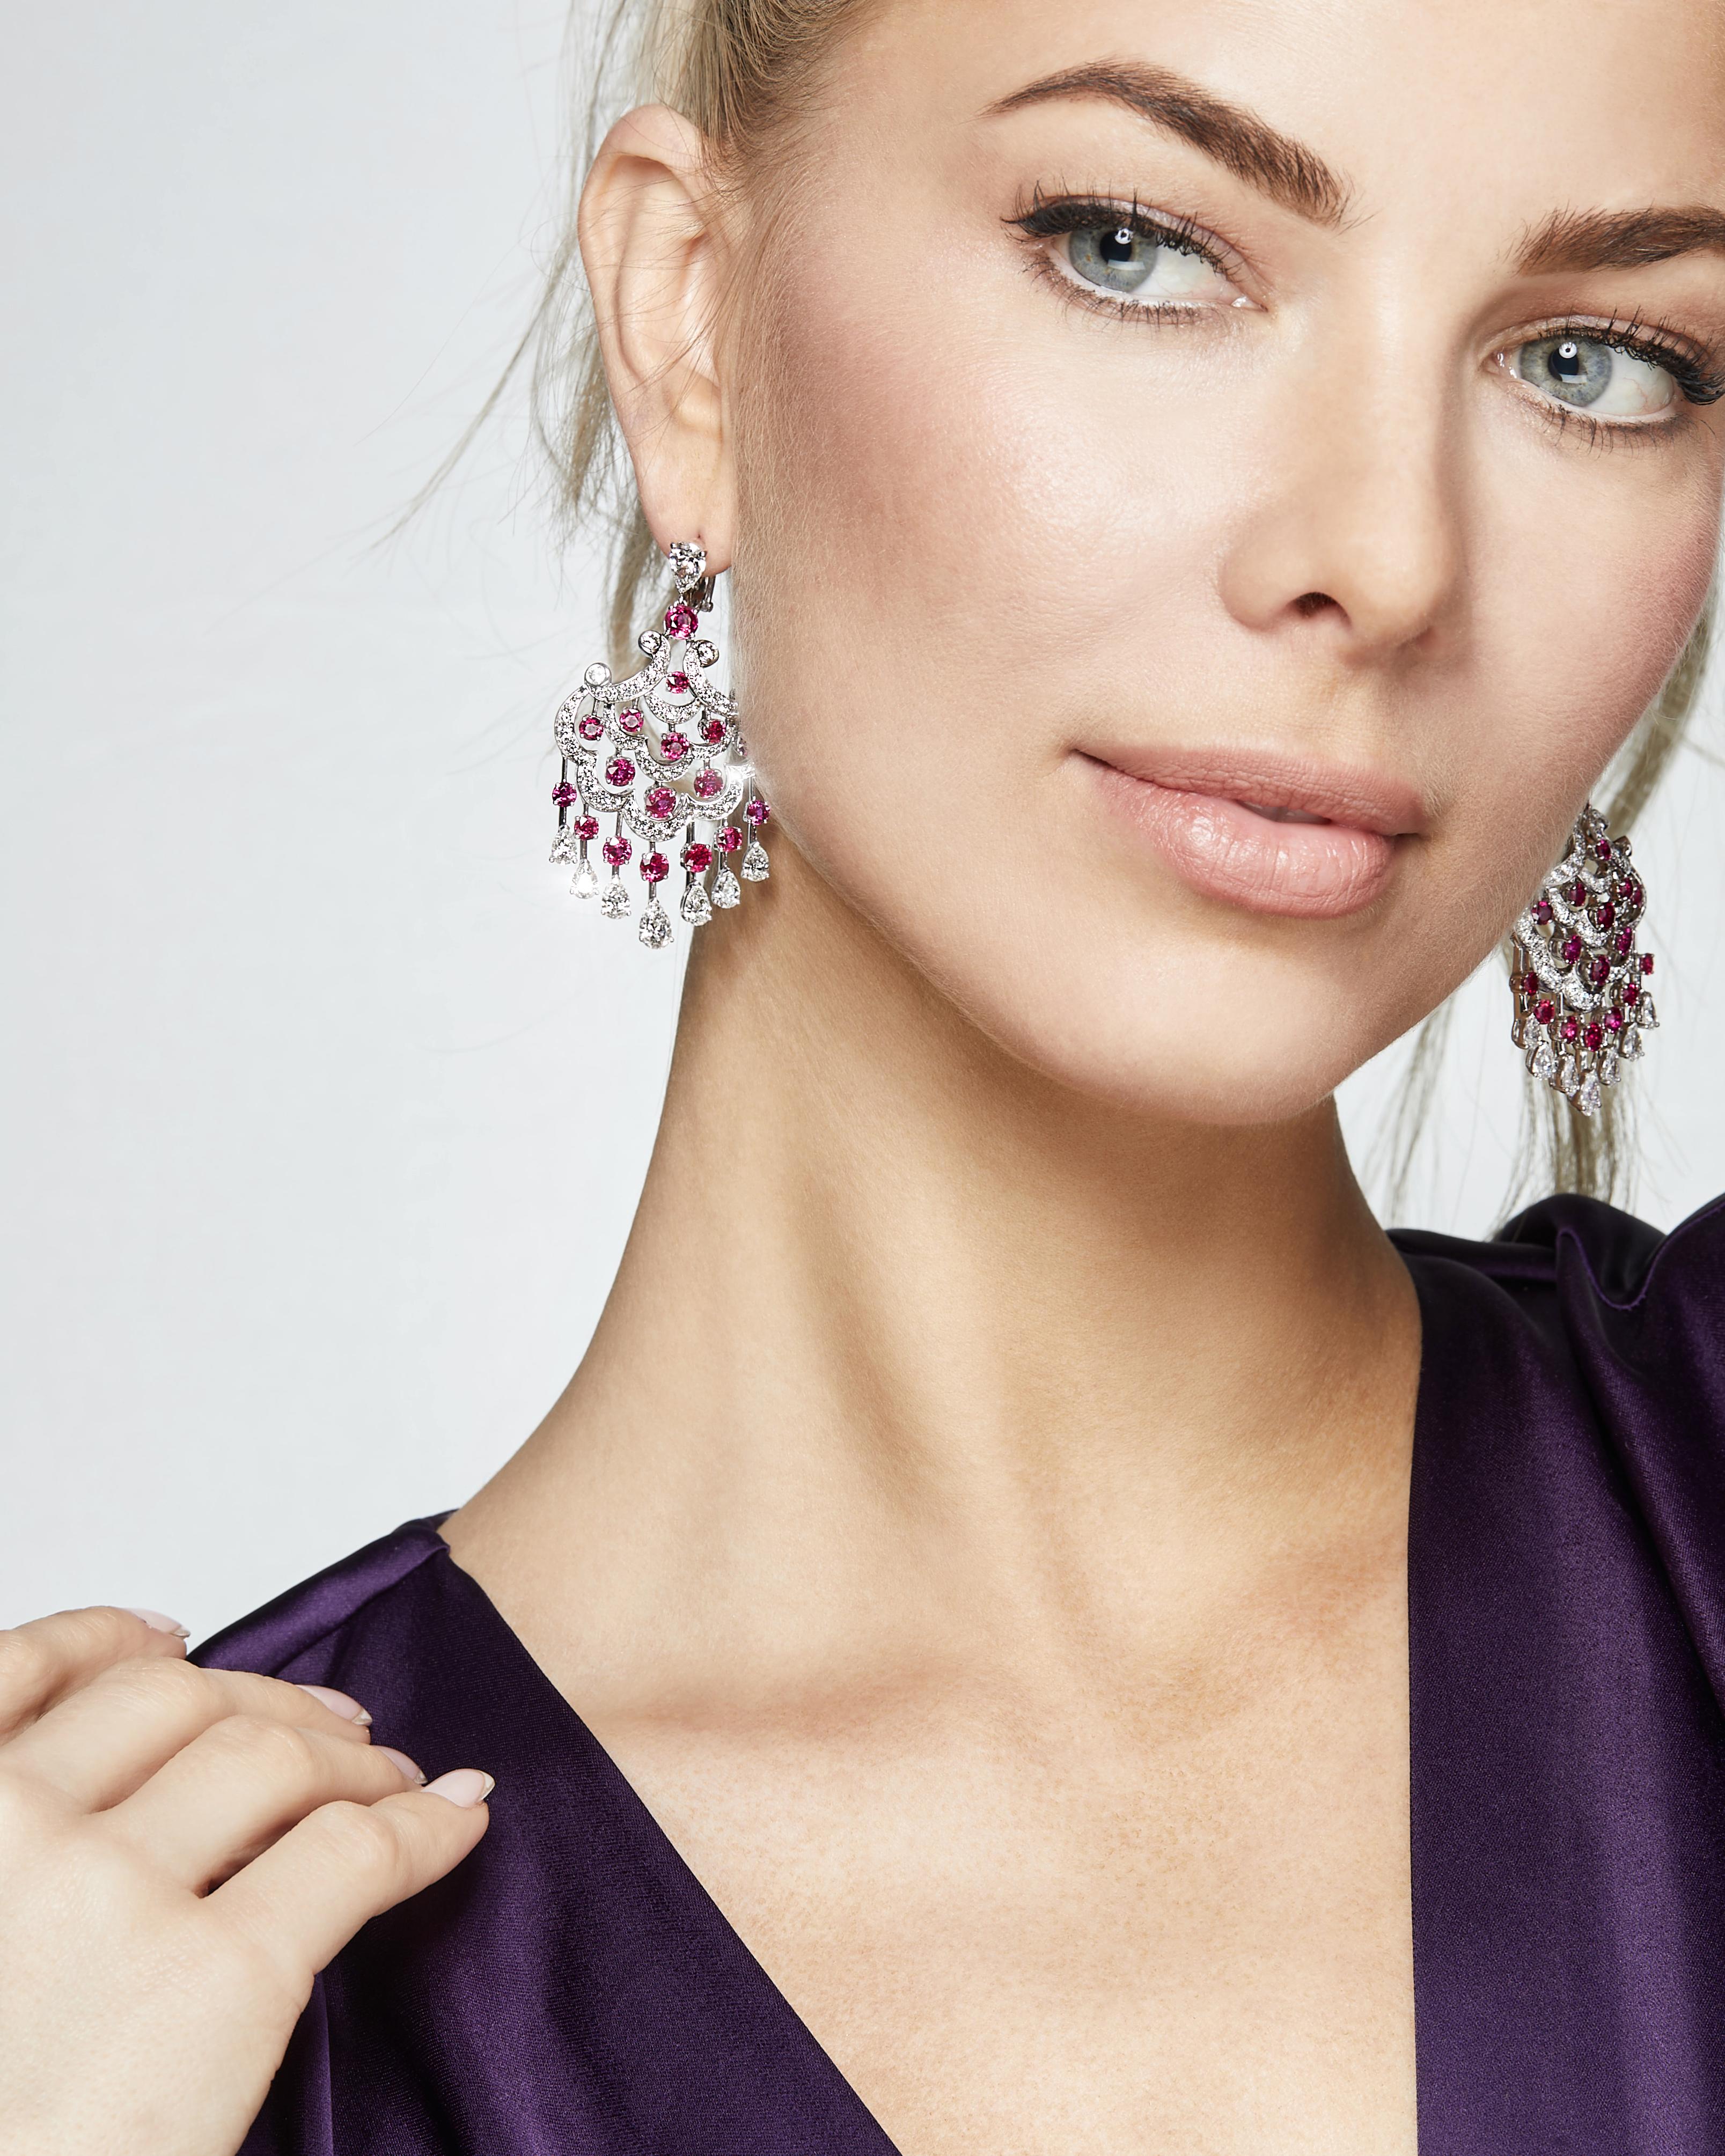 Introducing an elegant chandelier design, this Graff earrings feature a stunning array of round rubies and 16 pear-shaped white diamonds in 18-karat white gold. The elaborate design with diamonds cascading down in multiple tiers resembles a